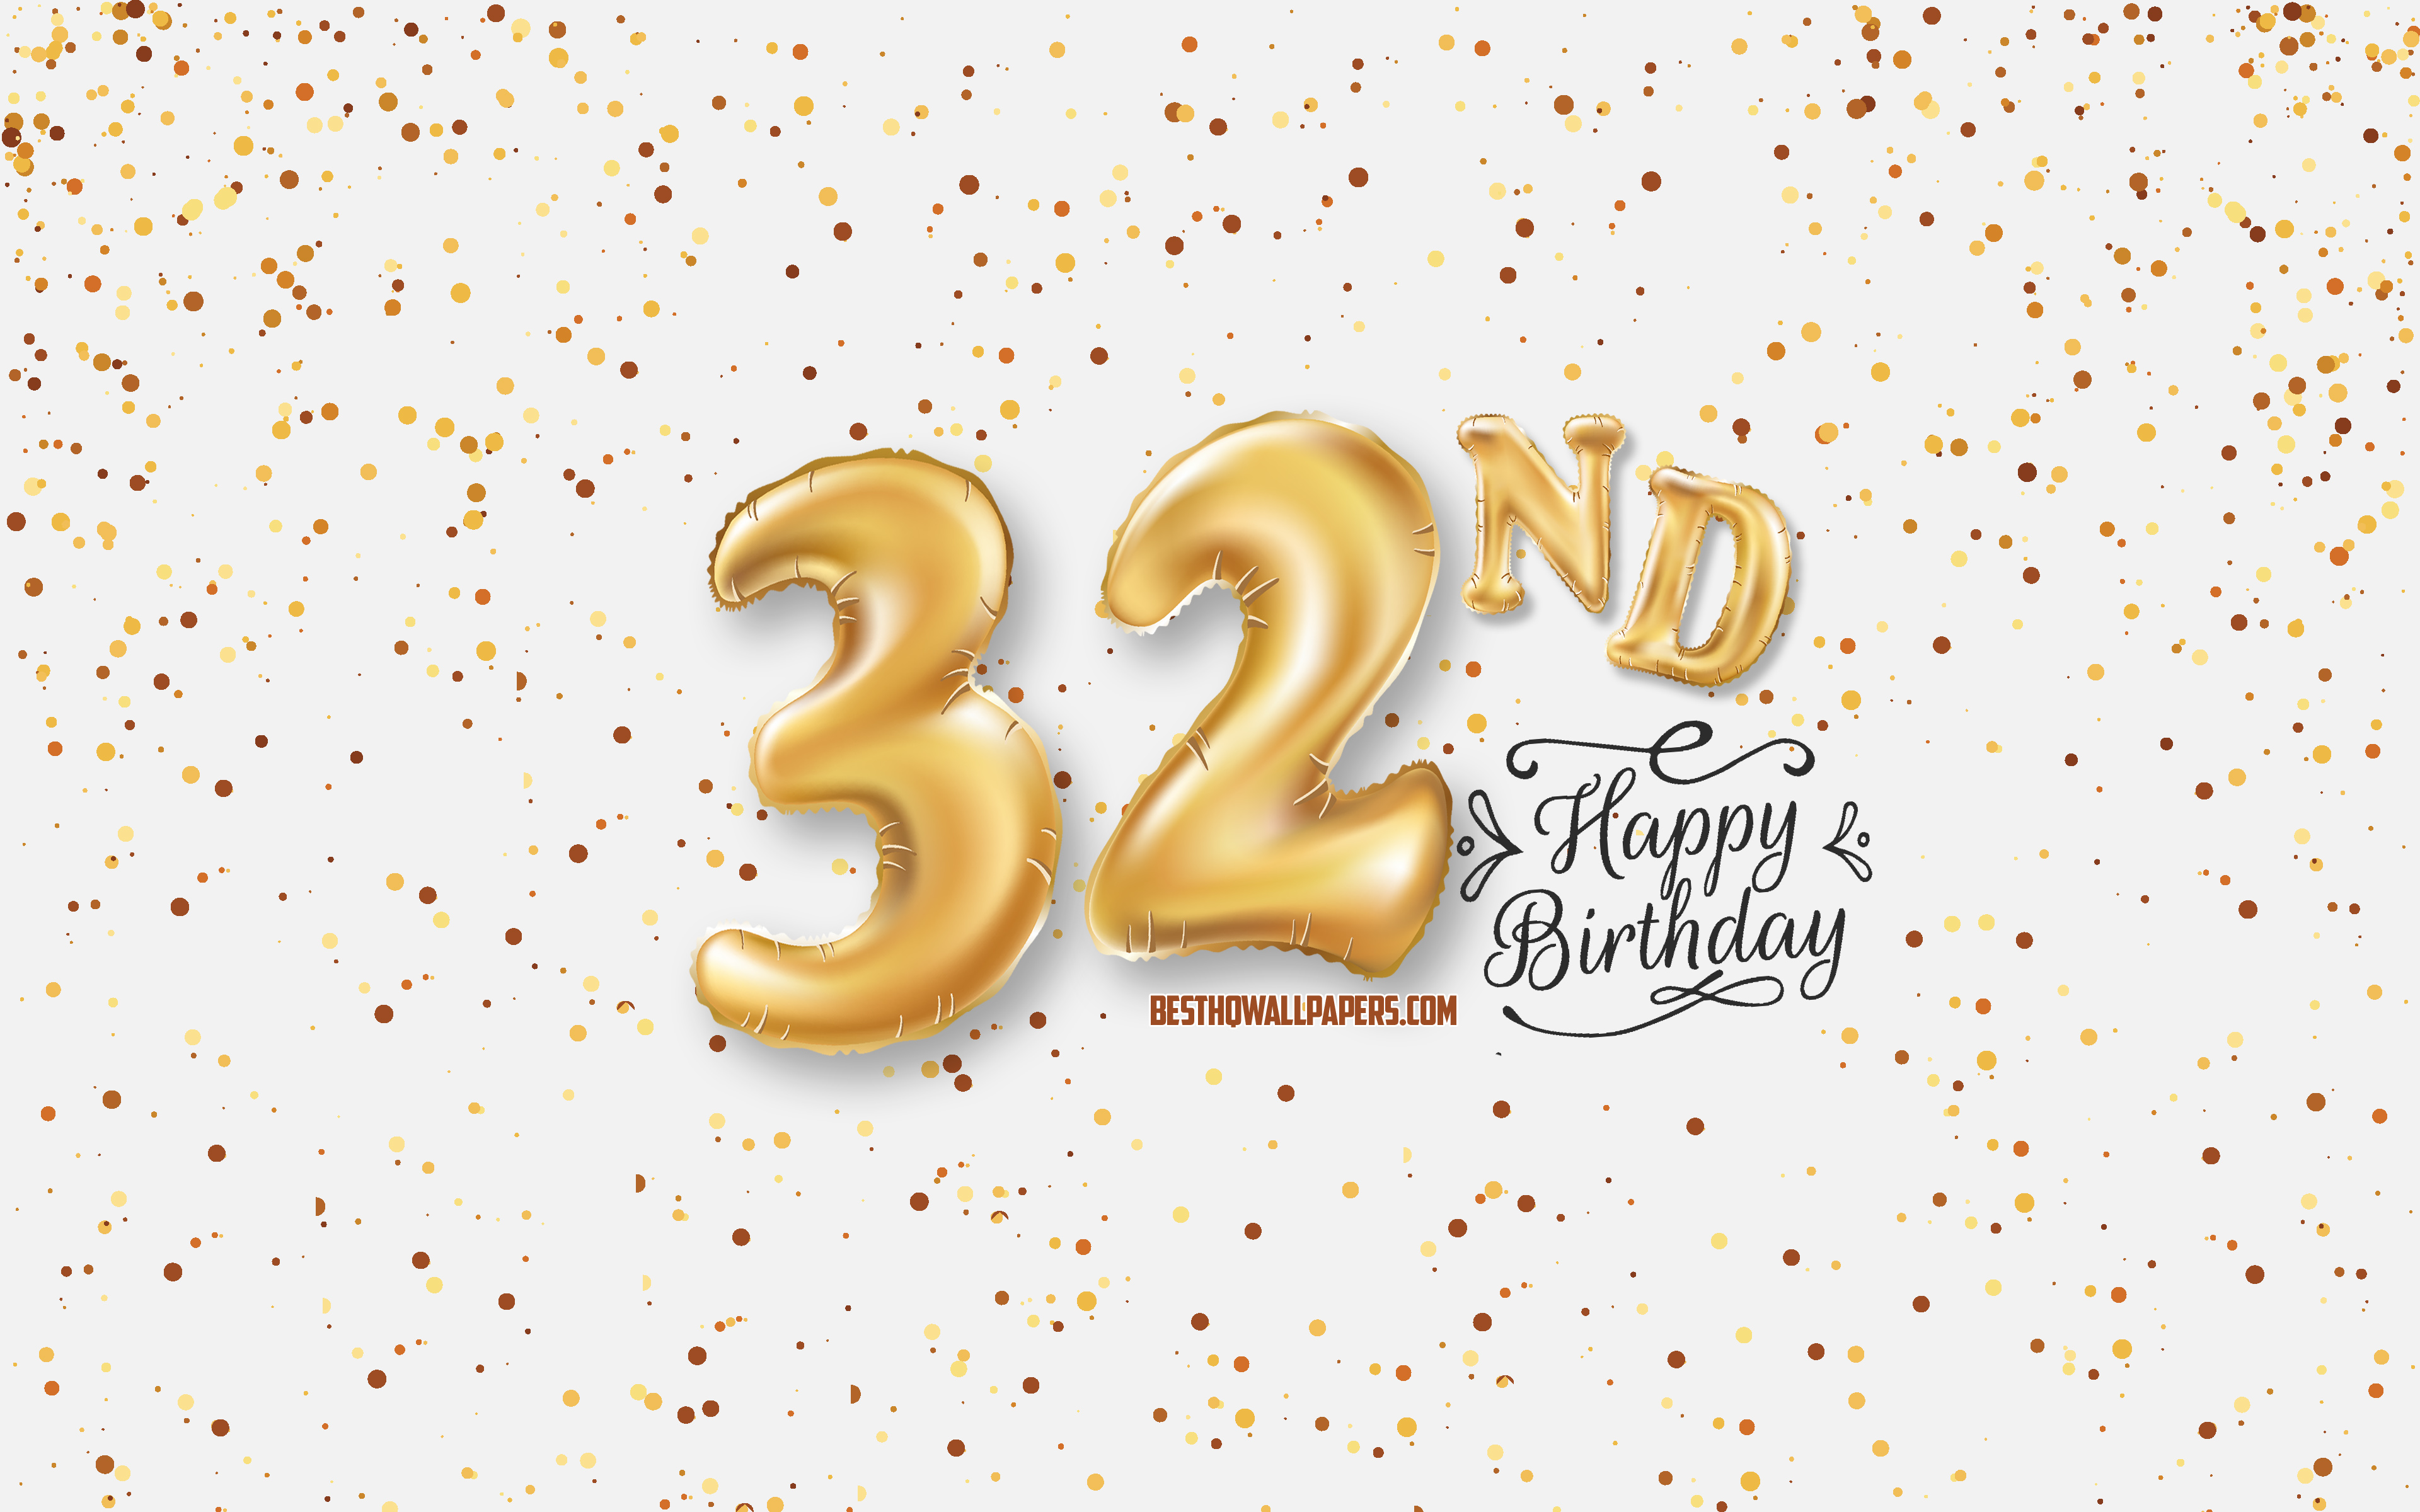 Download wallpaper 32nd Happy Birthday, 3D balloons letters, Birthday background with balloons, 32 Years Birthday, Happy 32nd Birthday, white background, Happy Birthday, greeting card, Happy 32 Years Birthday for desktop with resolution